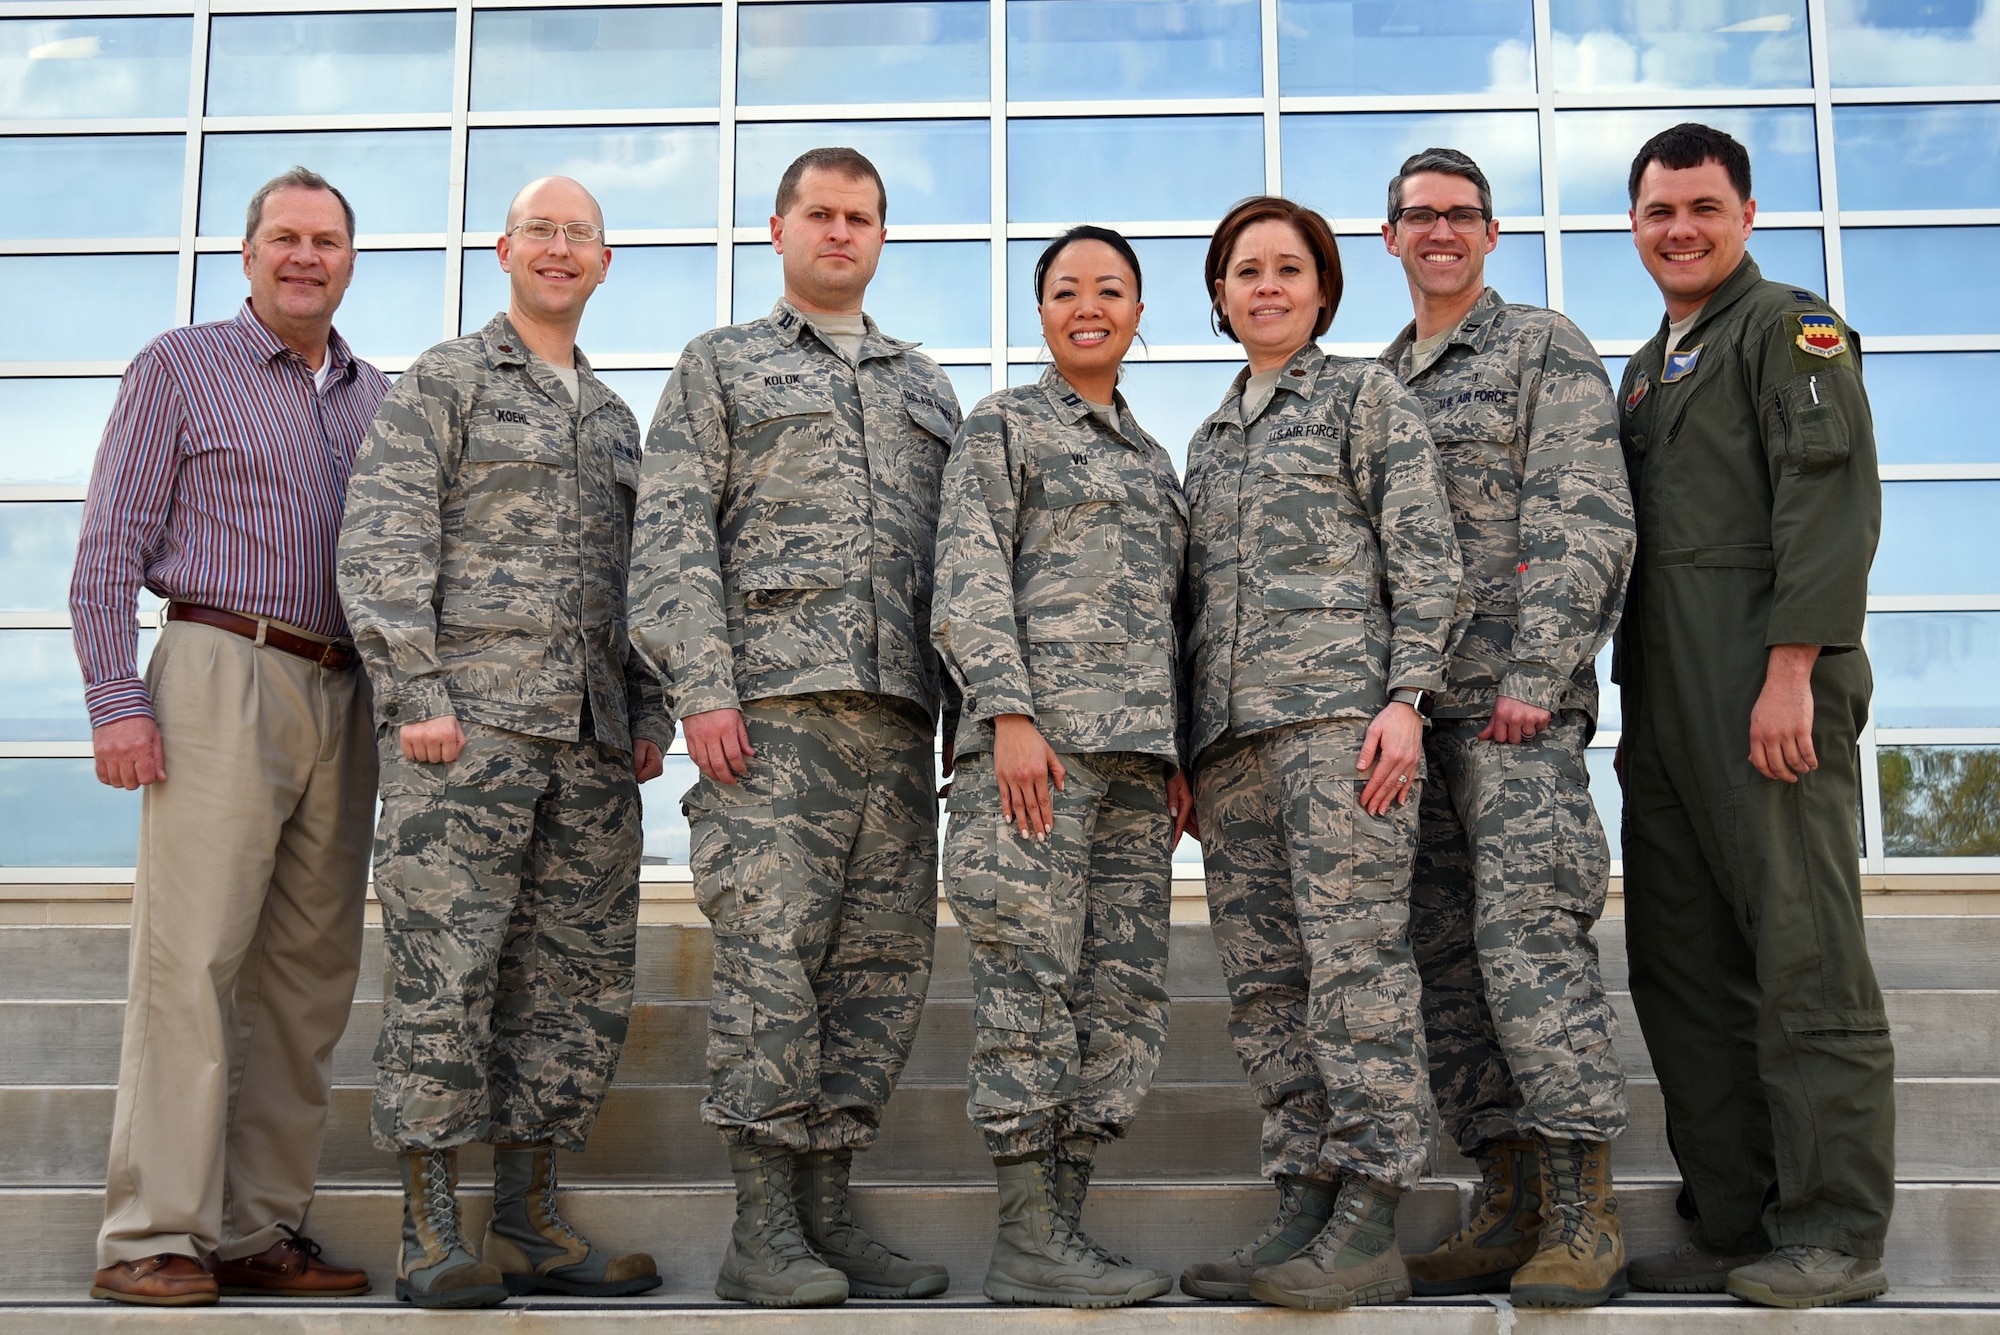 U.S. Air Force physicians assigned to the 20th Medical Group stand together for a group photo at Shaw Air Force Base, S.C., March 20, 2018.